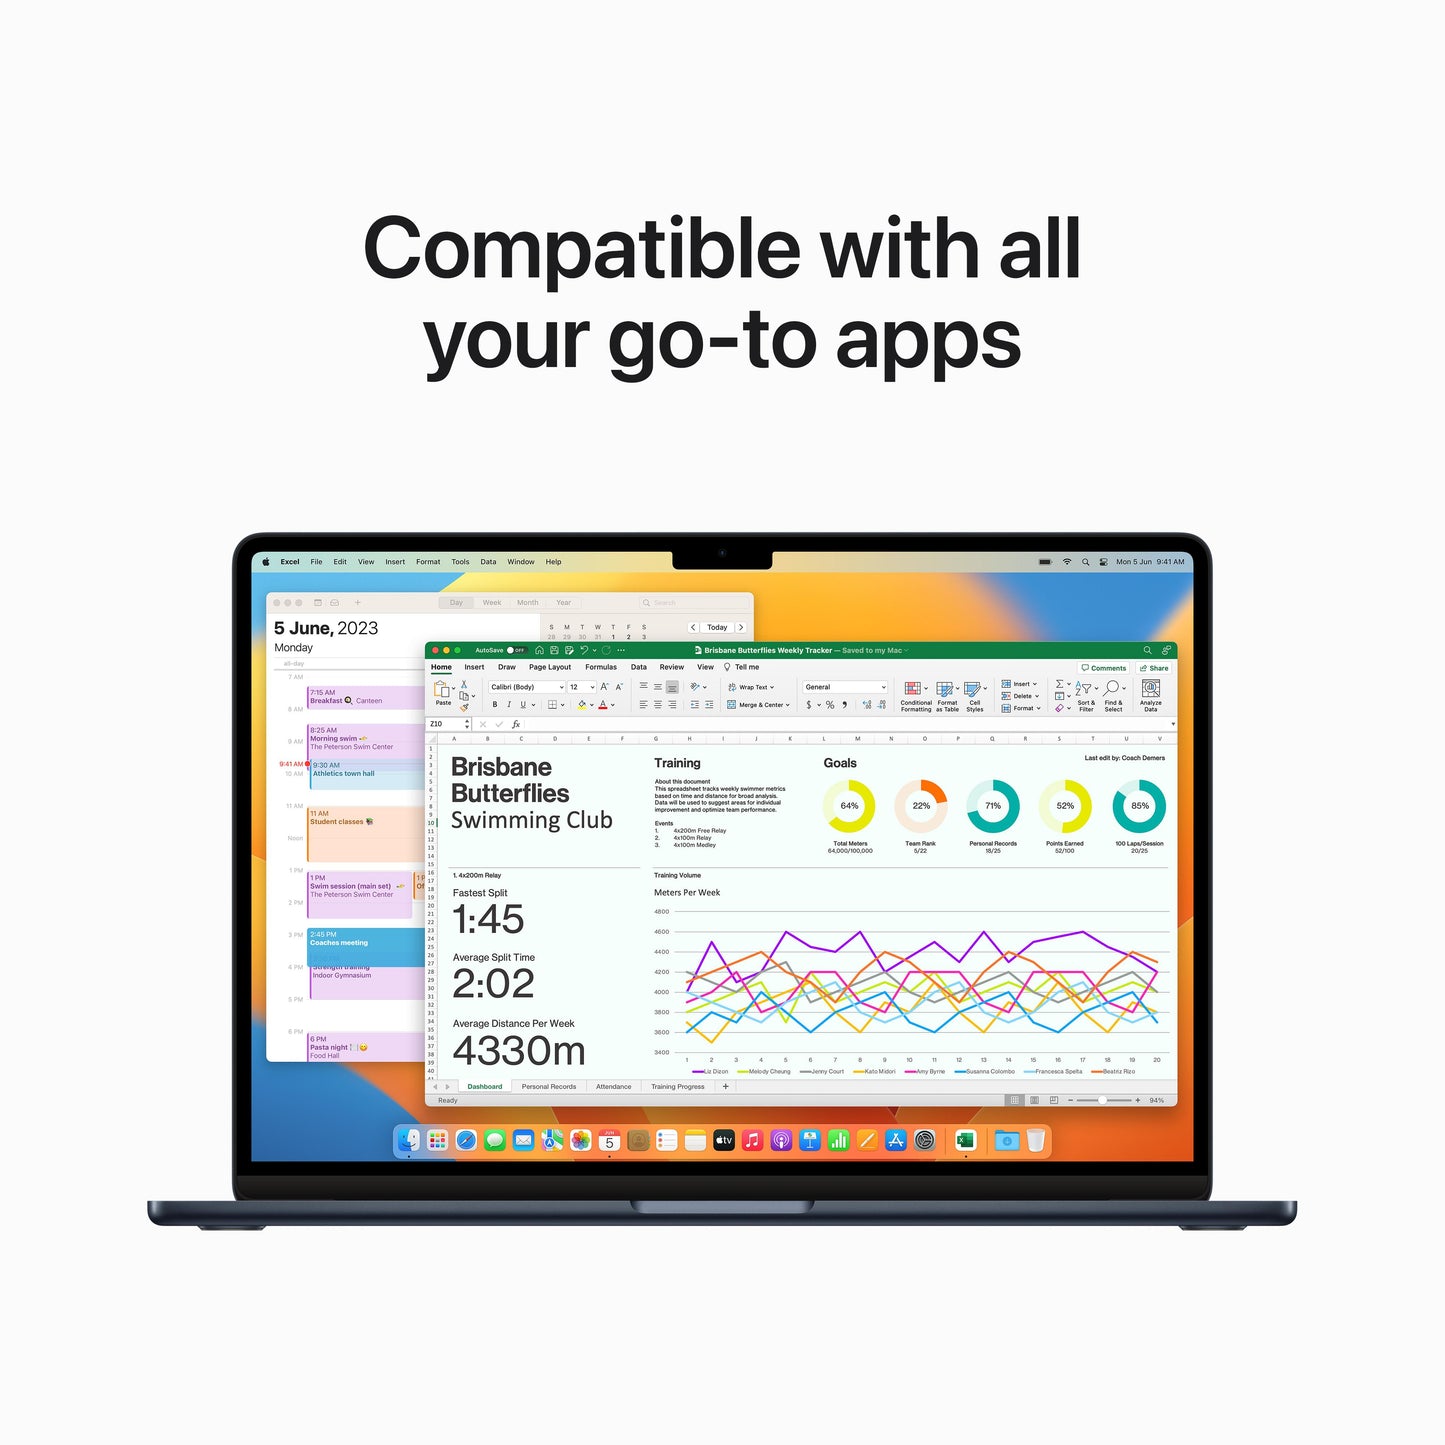 15-inch MacBook Air: Apple M2 chip with 8_core CPU and 10_core GPU, 256GB SSD - Midnight